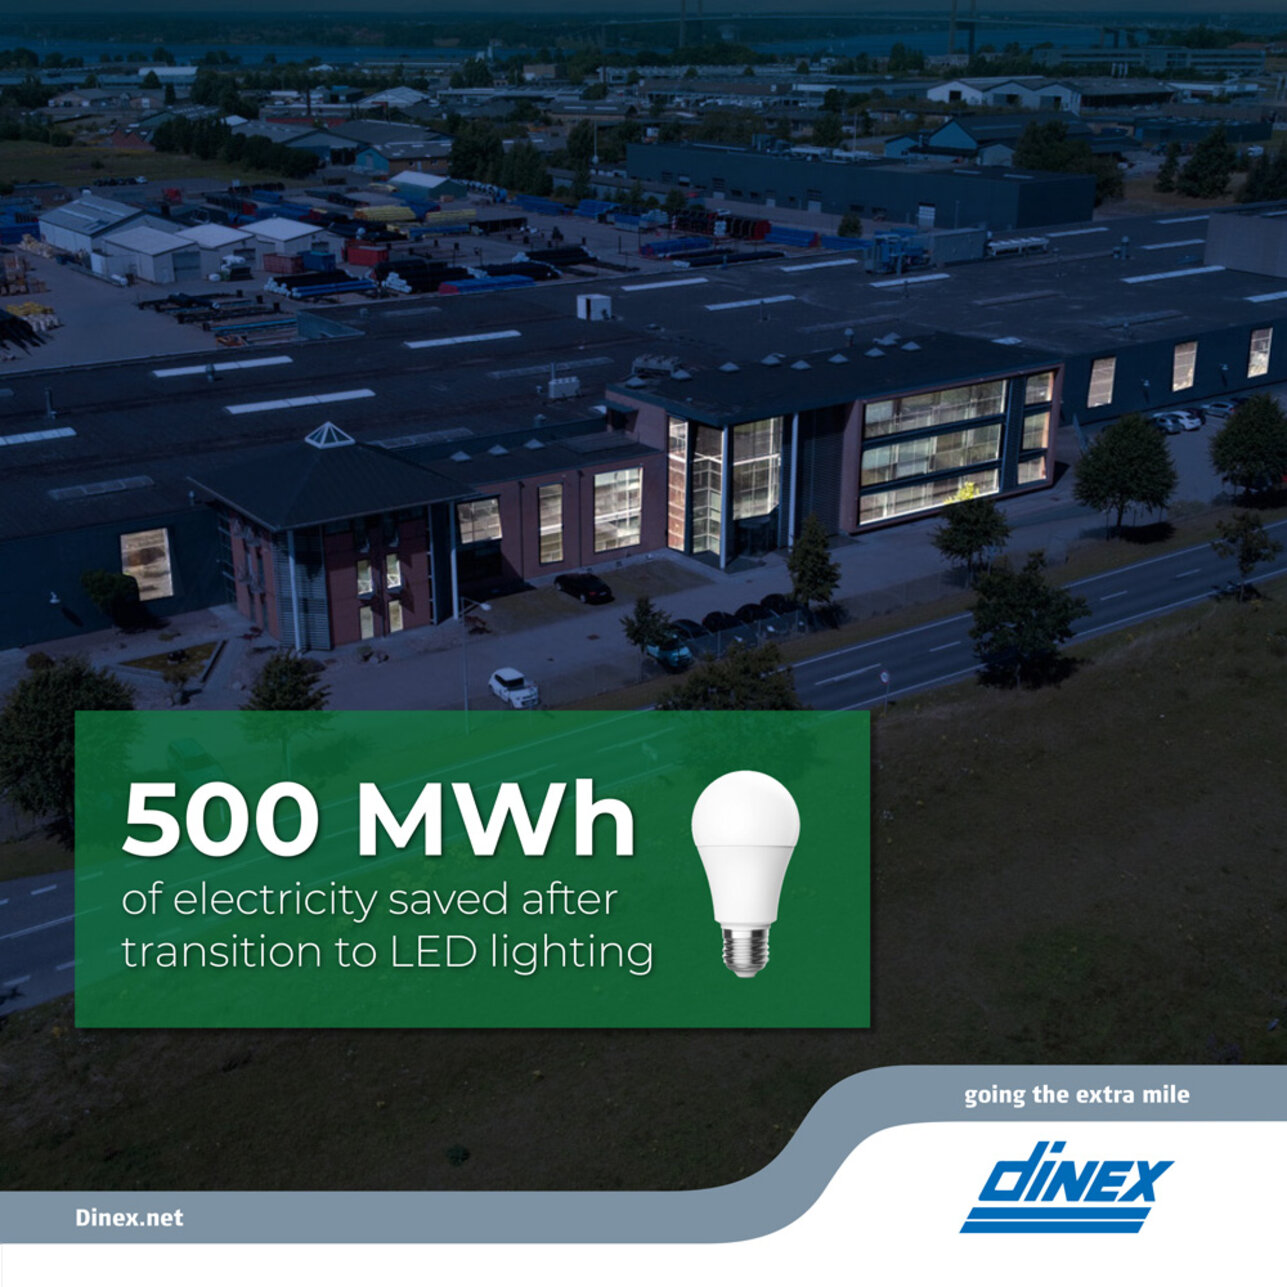 500 MWh electricity saved for lighting